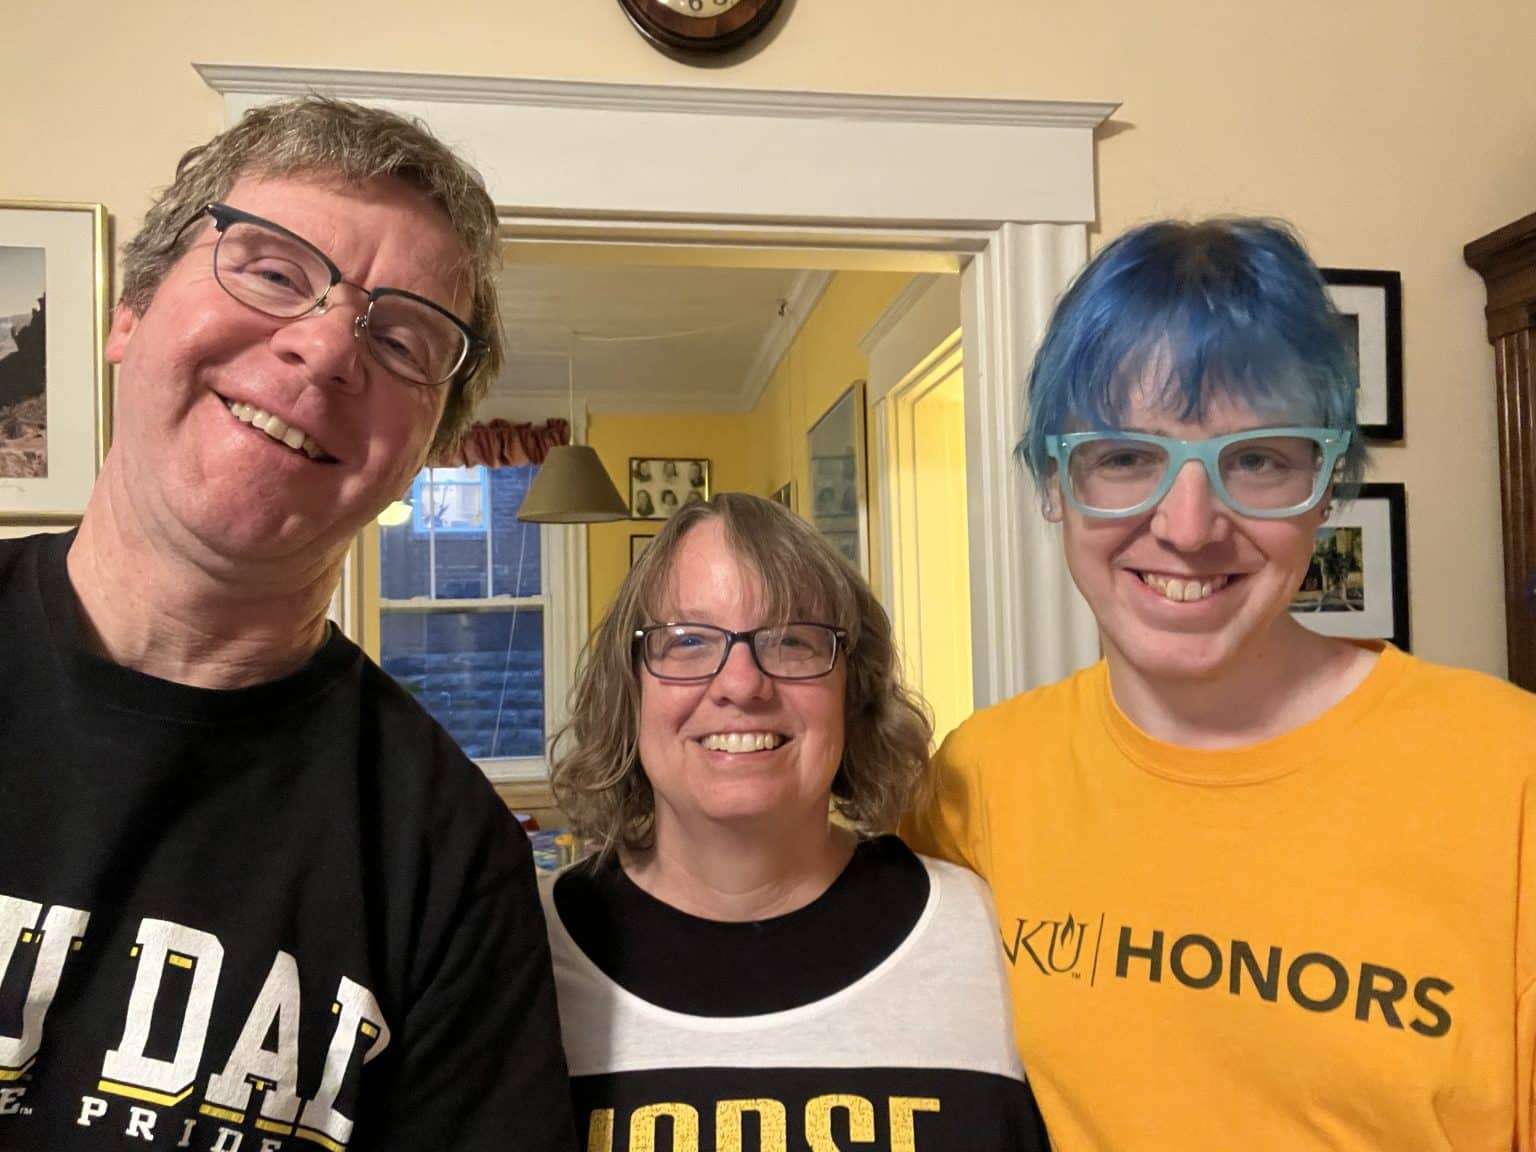 How one Northern Kentucky family prepares for potential passage of ‘anti-trans’ legislation - ‘Clash of worldviews’ in the KY legislature